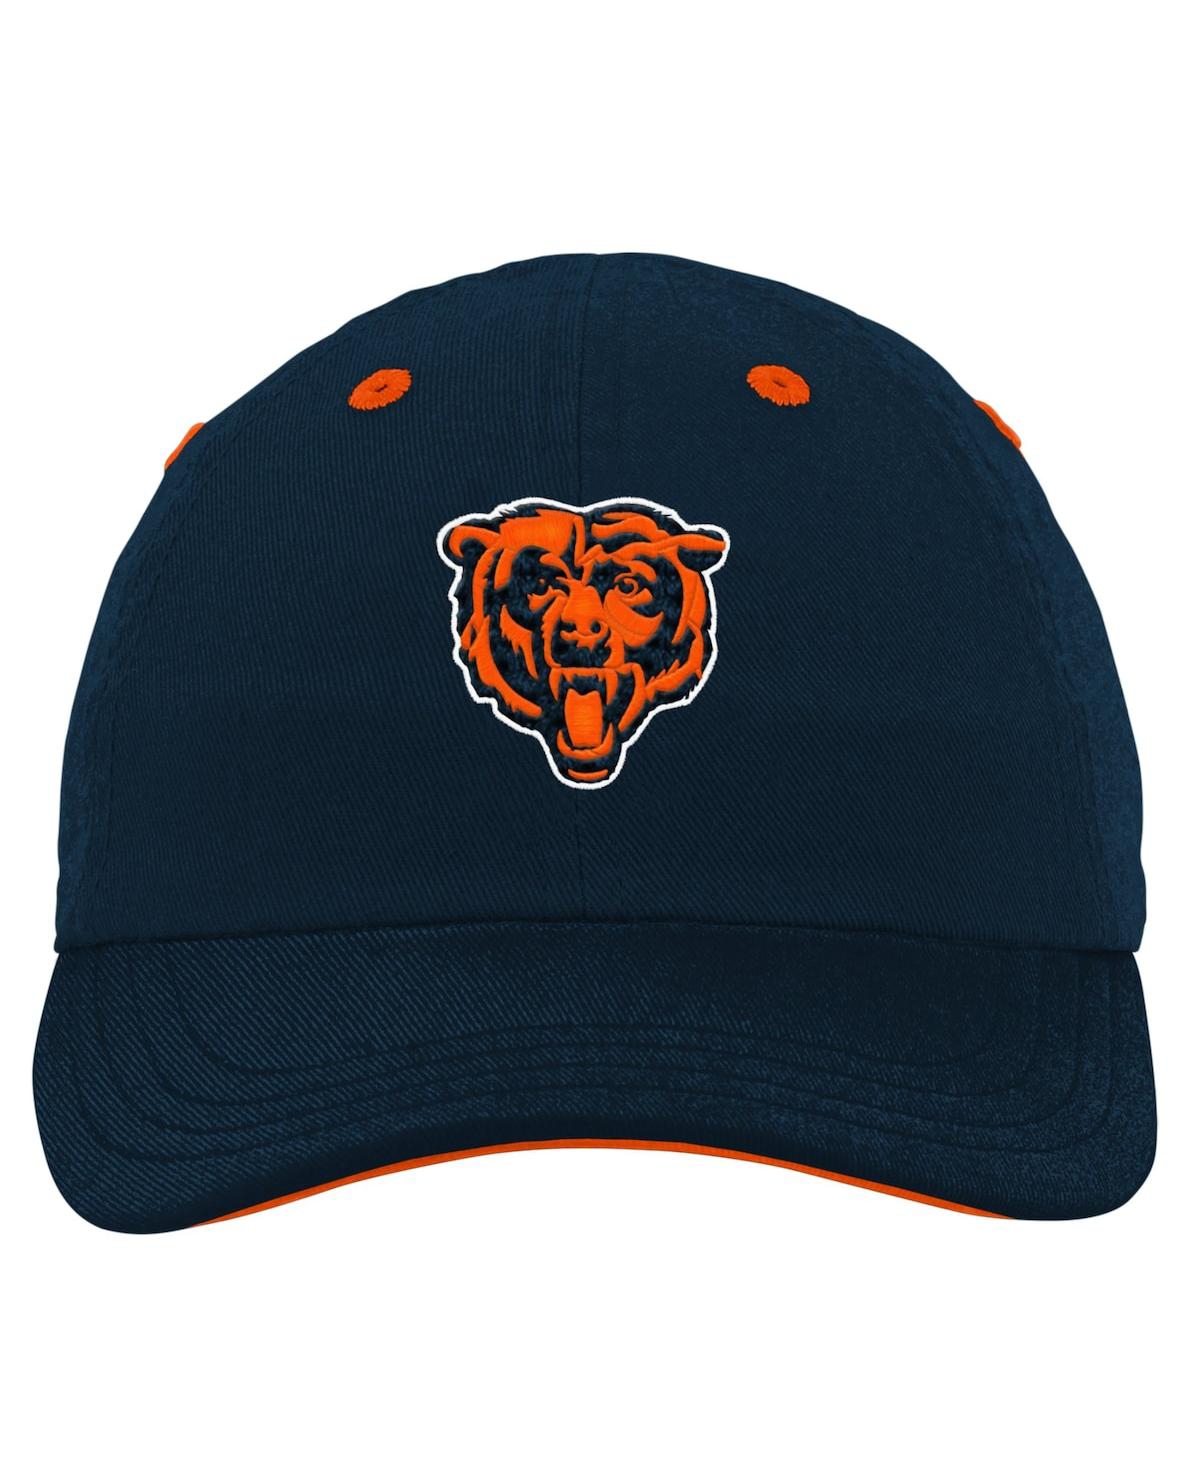 Shop Outerstuff Infant Boys And Girls Navy Chicago Bears Team Slouch Flex Hat